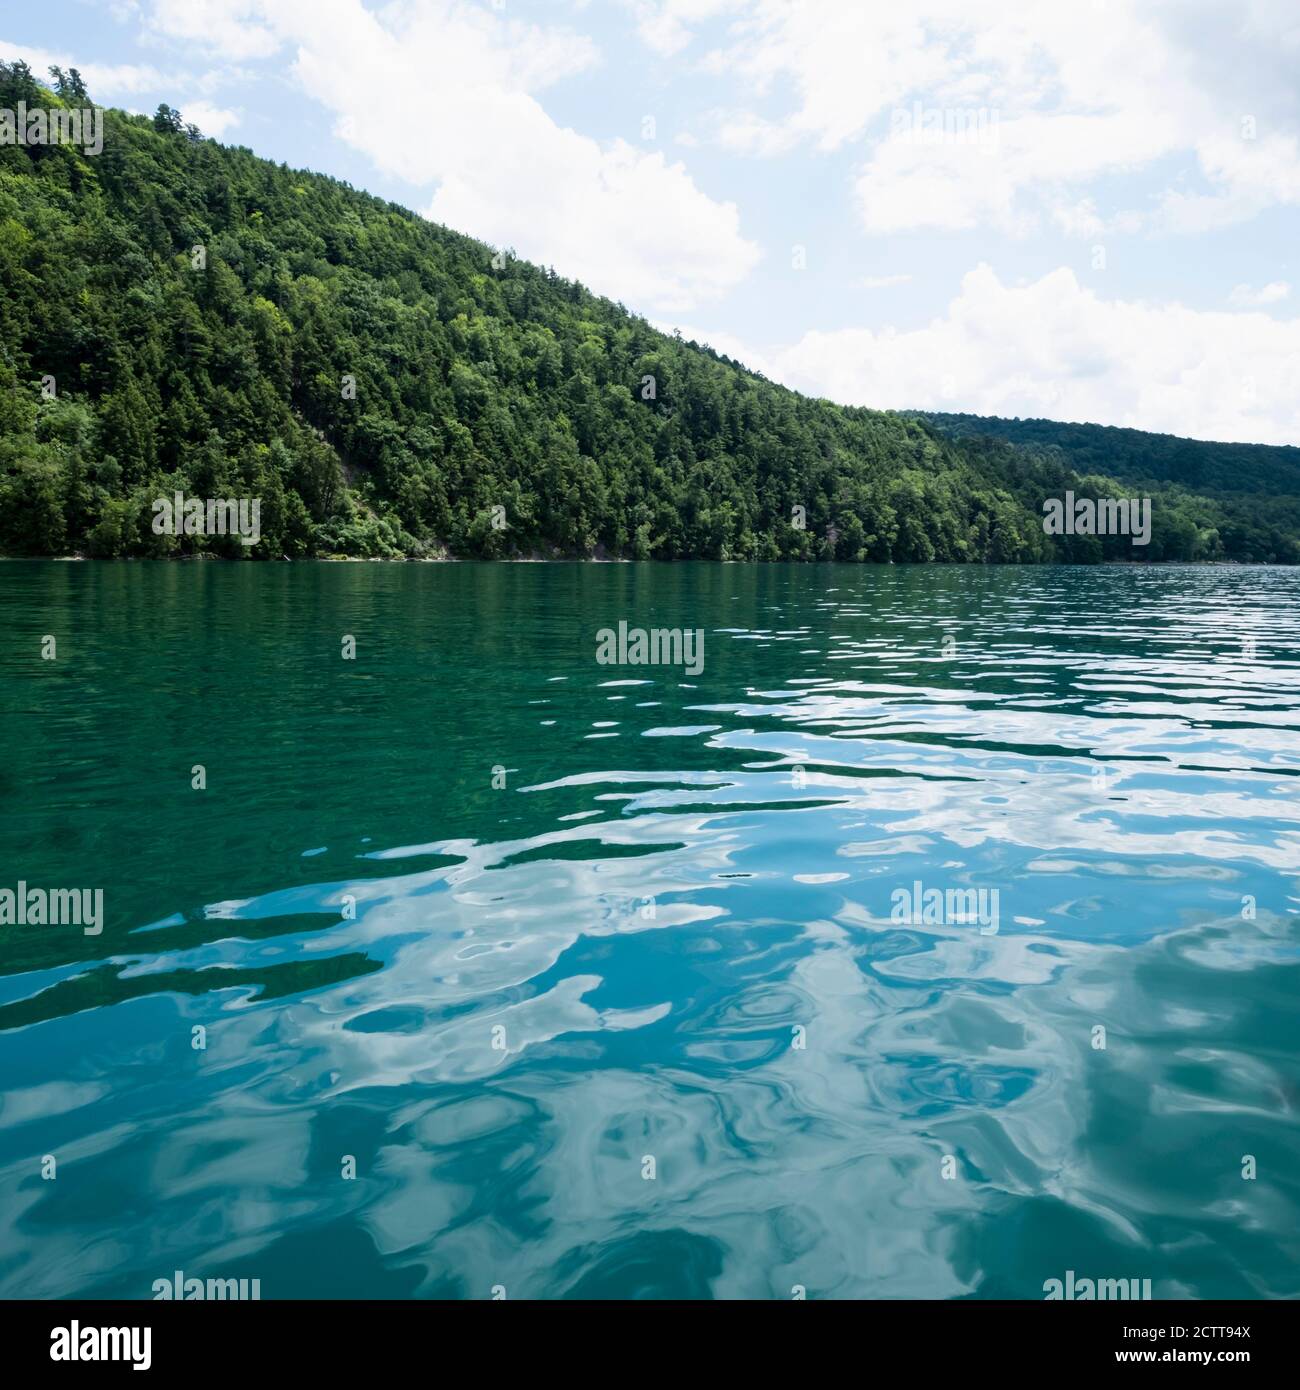 USA, New York, Cooperstown, Otsego Lake, Hill covered with forest at lakeside Stock Photo